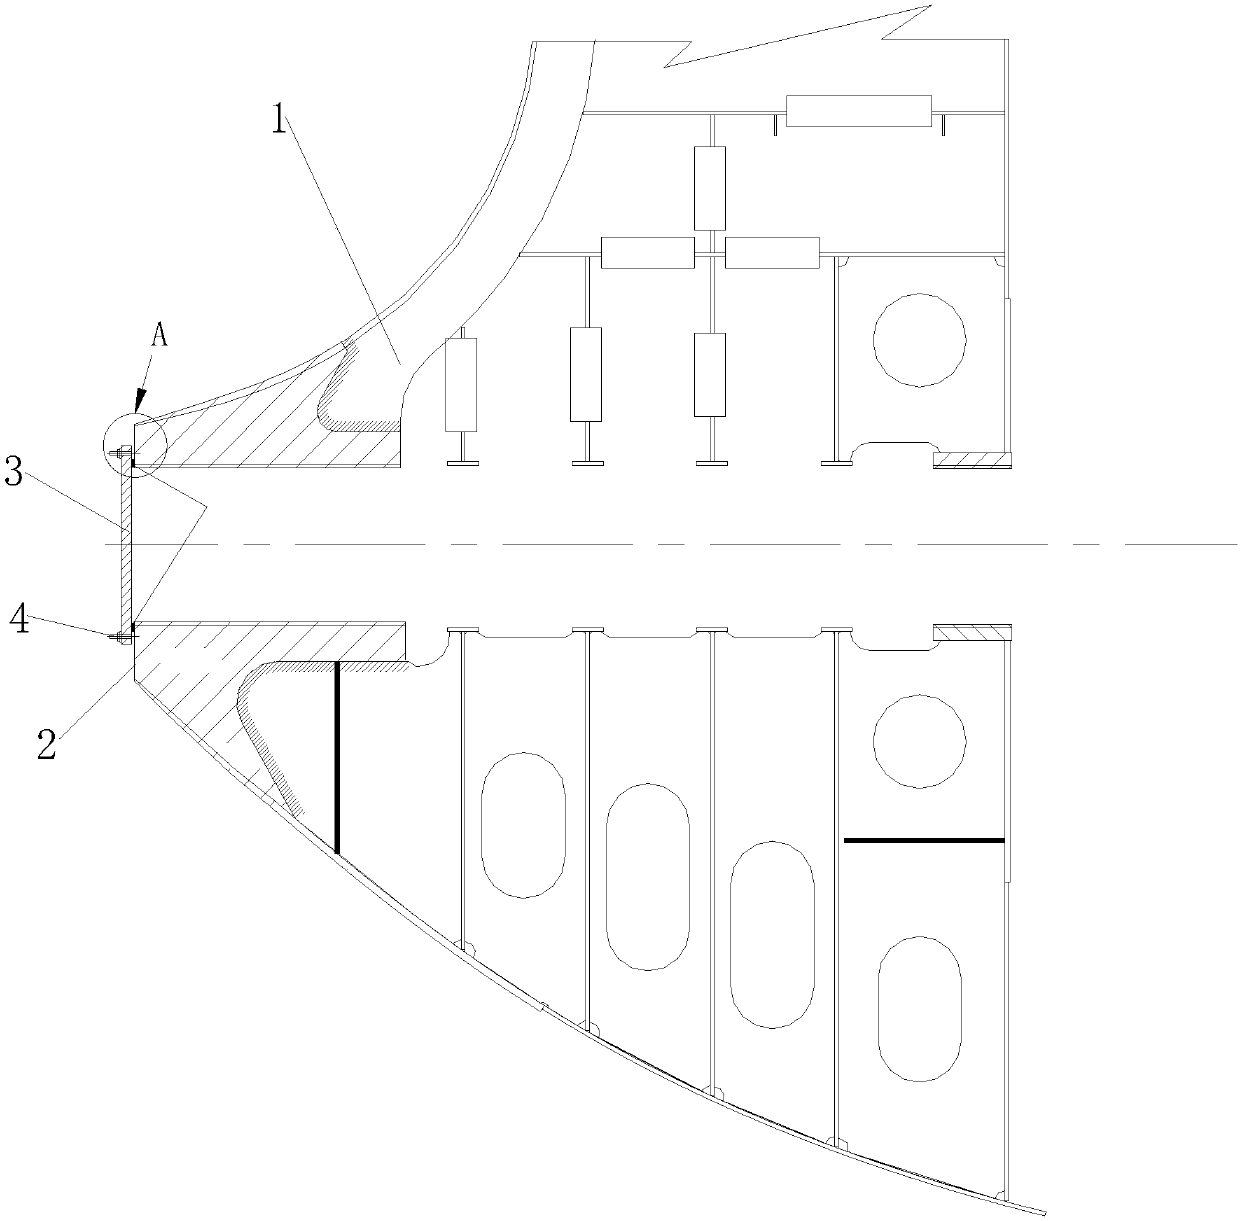 Method of sealing half-hull lift stern shaft hole or sea chest